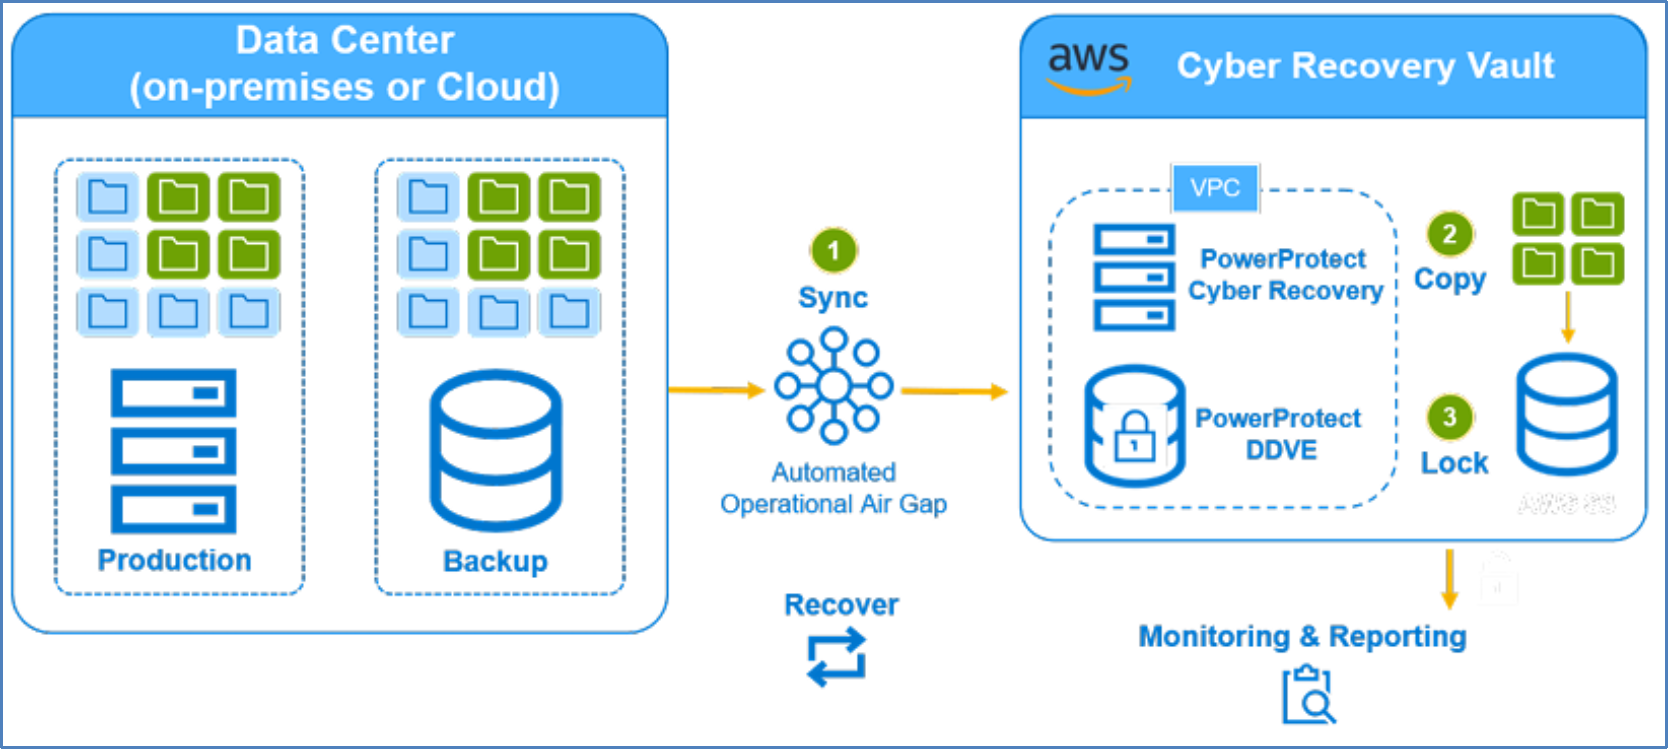 Cyber Recovery Vault also supports integration with AWS as shown in this figure.